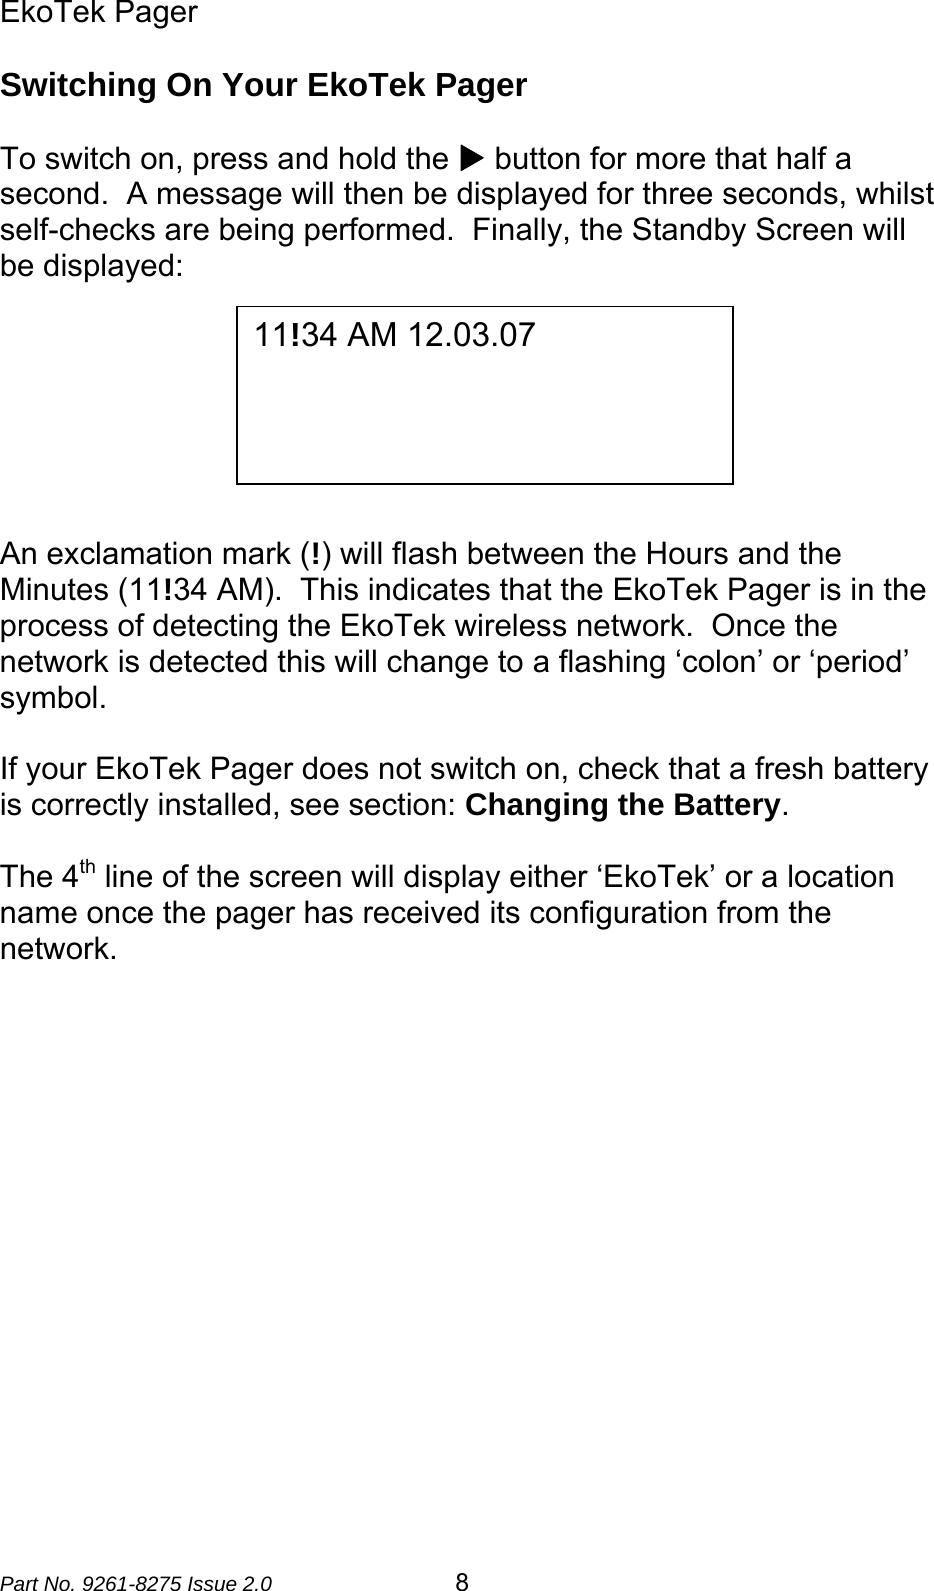 EkoTek Pager  Part No. 9261-8275 Issue 2.0   8 Switching On Your EkoTek Pager  To switch on, press and hold the X button for more that half a second.  A message will then be displayed for three seconds, whilst self-checks are being performed.  Finally, the Standby Screen will be displayed:        An exclamation mark (!) will flash between the Hours and the Minutes (11!34 AM).  This indicates that the EkoTek Pager is in the process of detecting the EkoTek wireless network.  Once the network is detected this will change to a flashing ‘colon’ or ‘period’ symbol.   If your EkoTek Pager does not switch on, check that a fresh battery is correctly installed, see section: Changing the Battery.  The 4th line of the screen will display either ‘EkoTek’ or a location name once the pager has received its configuration from the network.  11!34 AM 12.03.07   